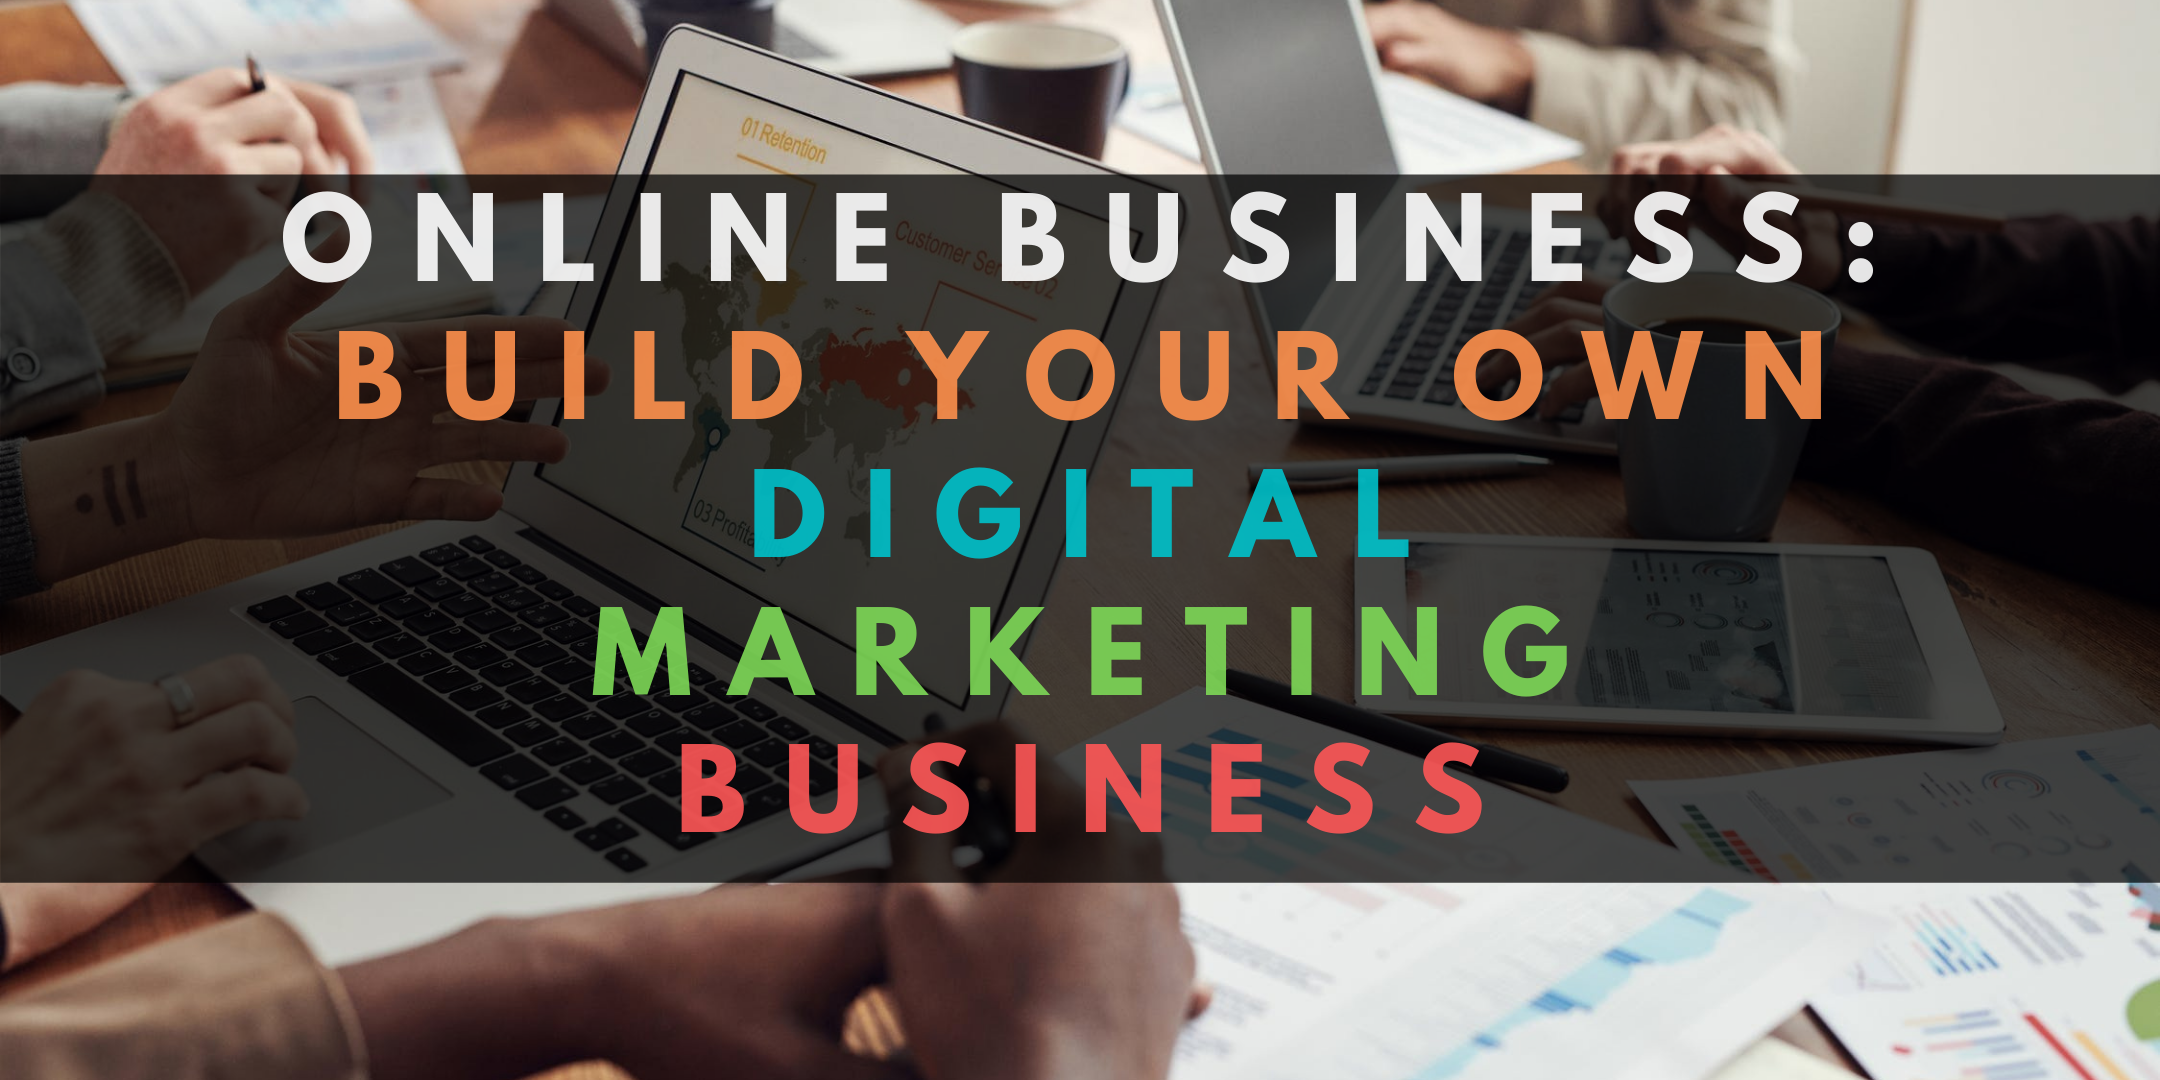 Online Business: Build your own Digital Marketing Business